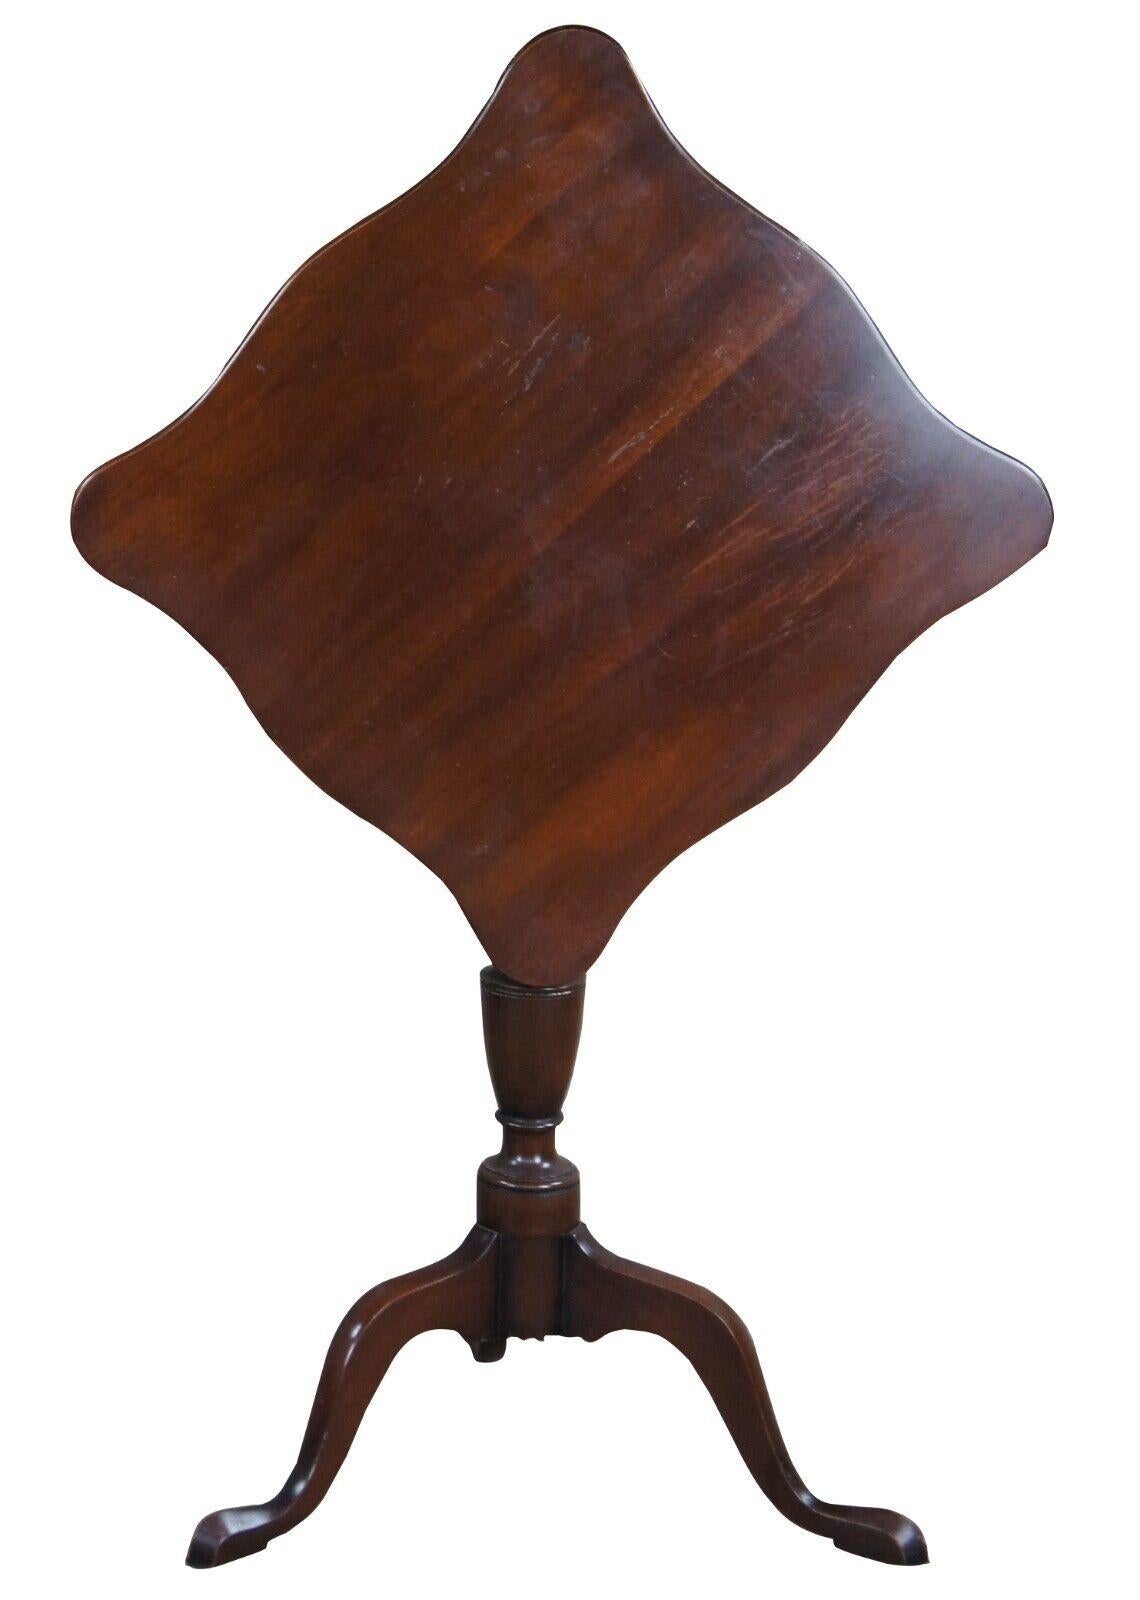 American Colonial 2 Kittinger Colonial Williamsburg Federal Mahogany Tilt Top Tables Candle Stands For Sale